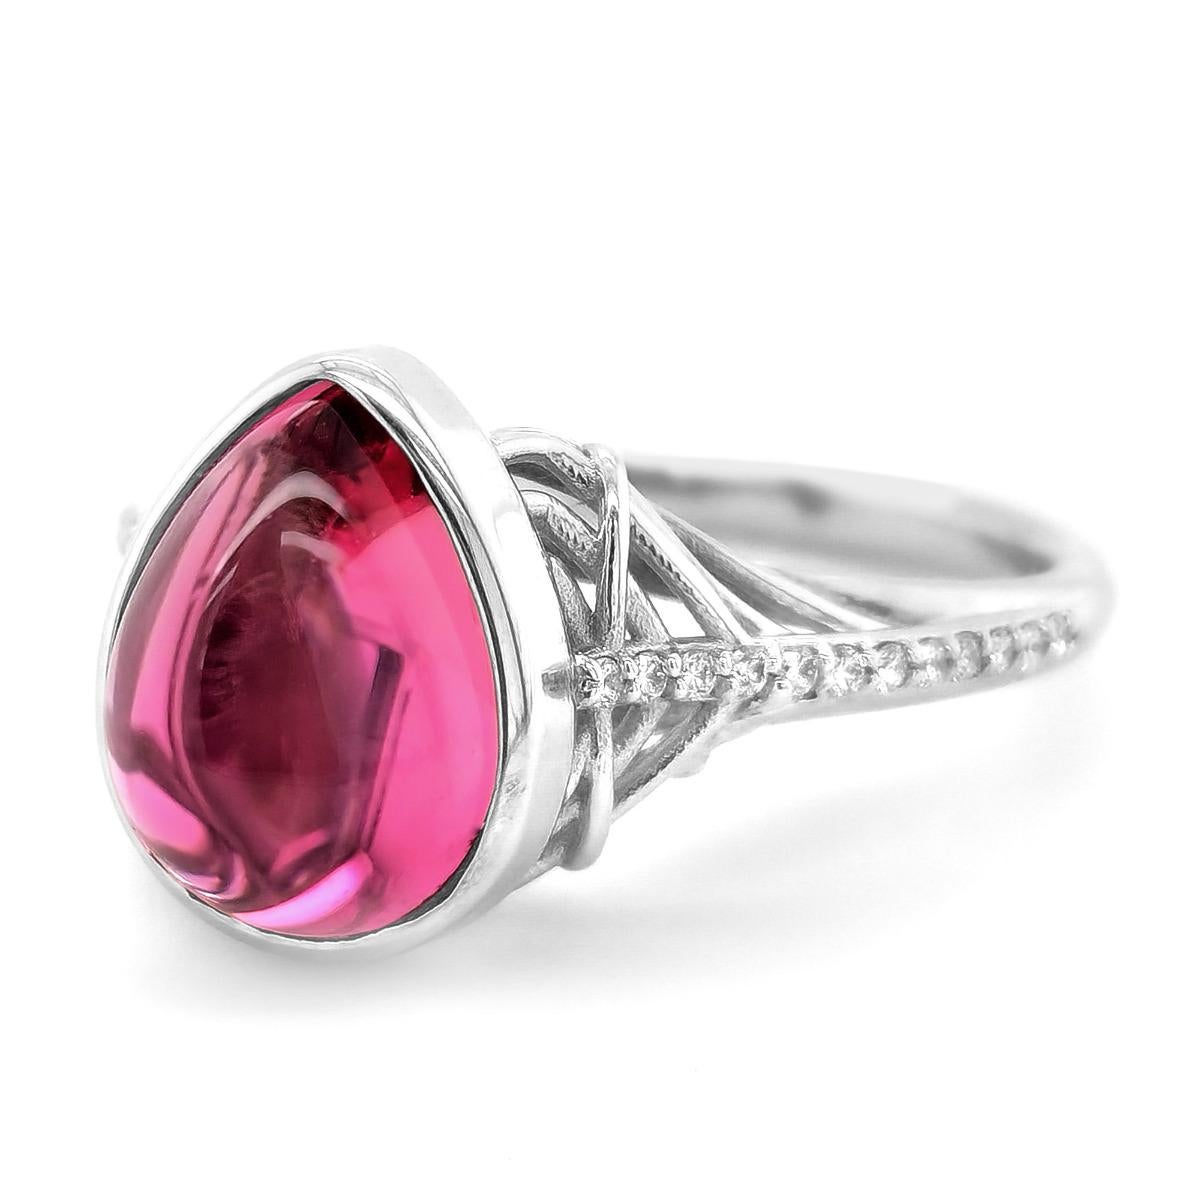 Tourmaline is known to symbolize friendship and wealth, and this 3.75 carat well crafted gemstone embodies just that. Cut as a cabochon, the gemstones grandeur is brought to life. Perfectly matched diamonds that compliment the gemstone, this ring is